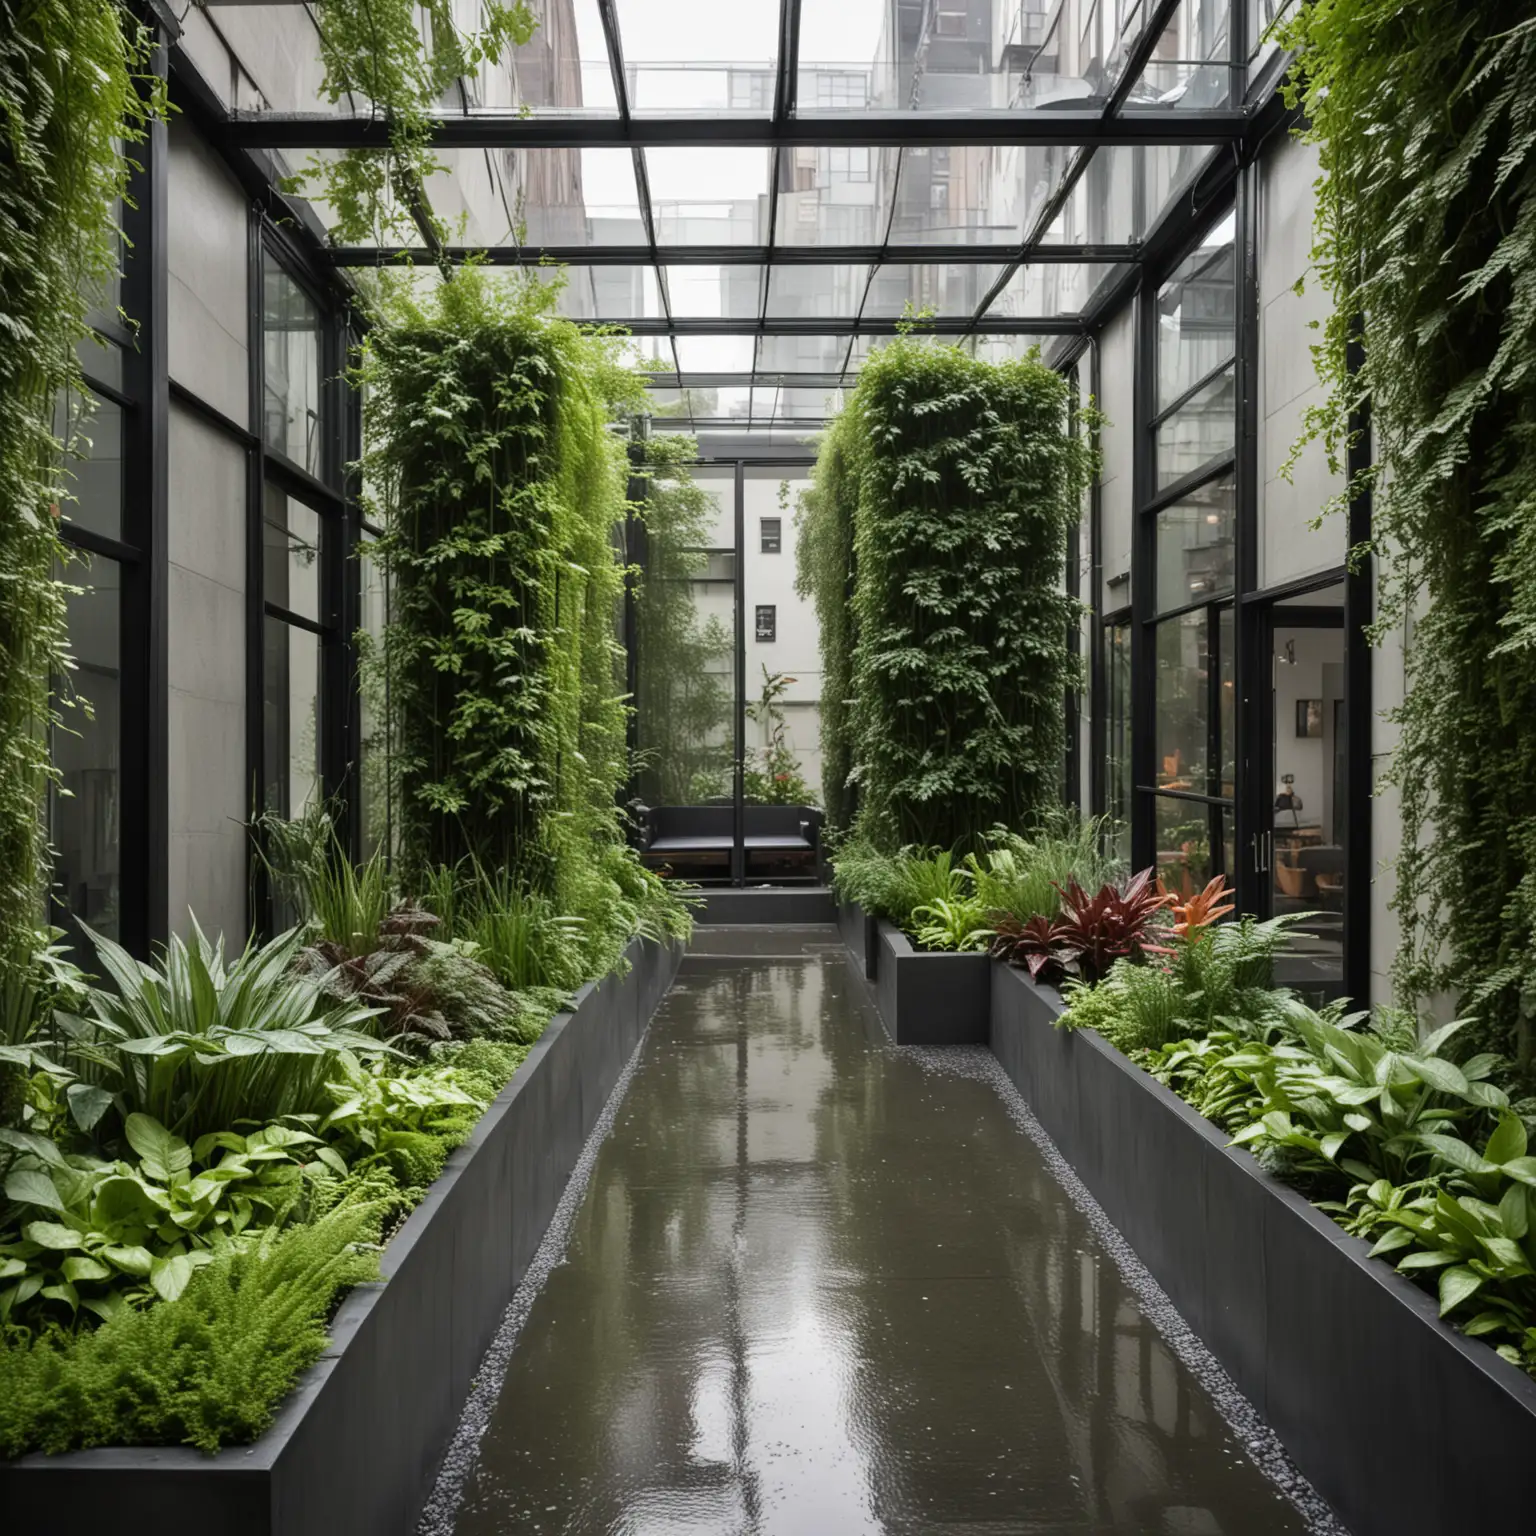 a wide shot of a modern urban garden design that features vertical gardens on sleek steel frames. Use a combination of ivy, ferns, and flowering plants for the vertical spaces, and design a linear water feature running through the center. Include a glass pavilion with a reflective roof and metal furniture. This garden is set in a bustling city on a rainy spring morning, with the greenery providing a refreshing contrast to the grey urban landscape. The rain adds a reflective sheen to the surfaces, enhancing the modern aesthetic. The garden includes concrete planters with integrated seating, offering a place to relax amidst the urban environment.